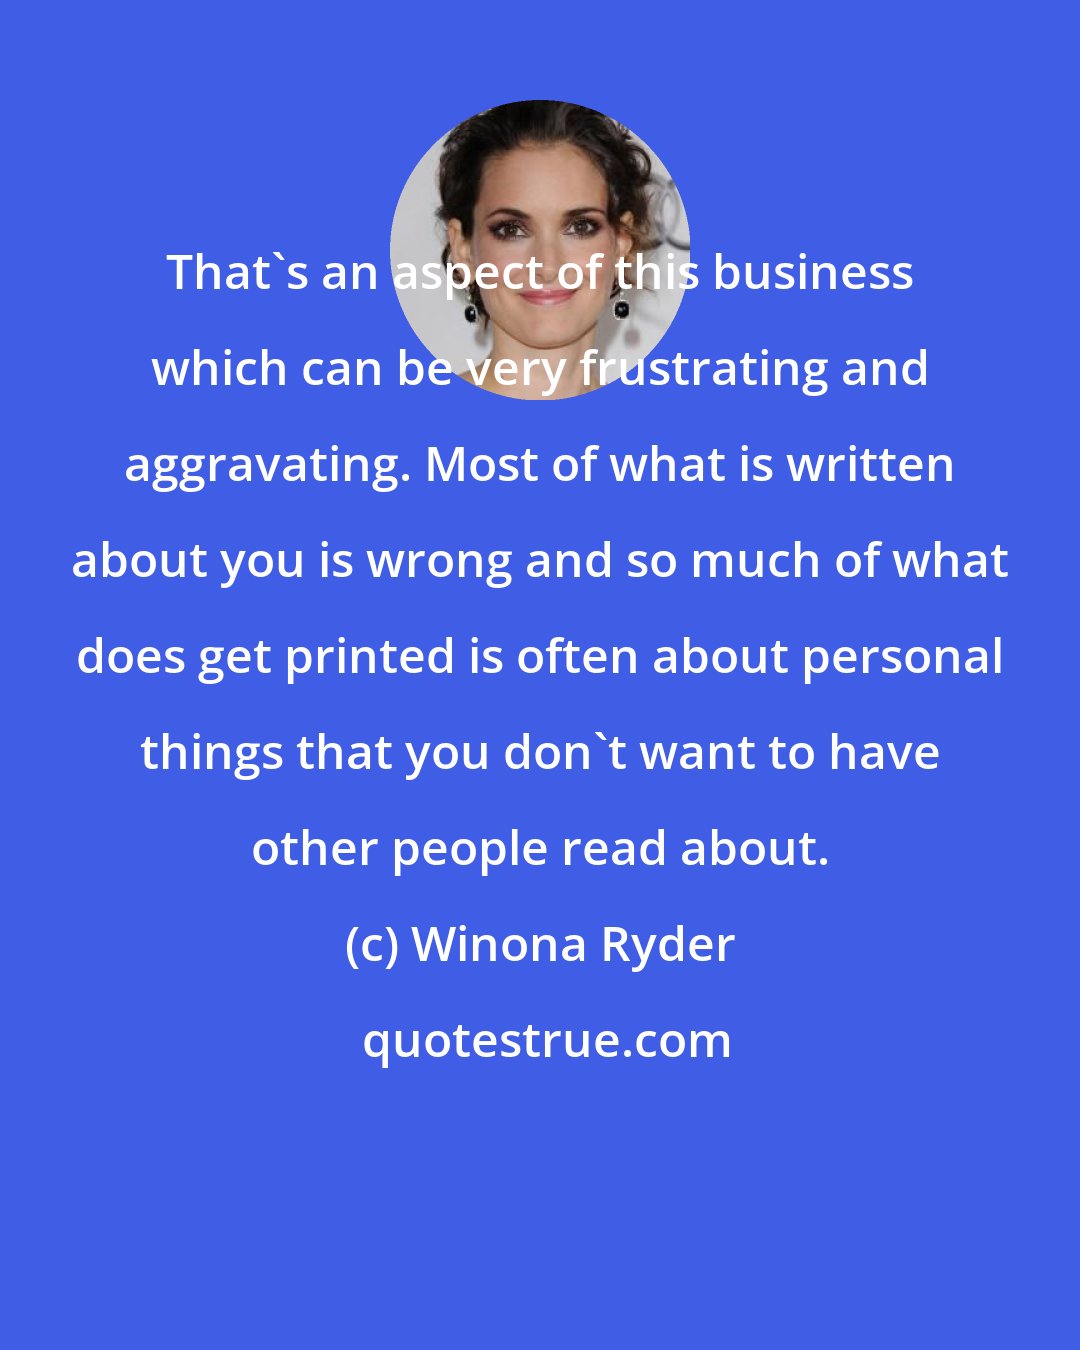 Winona Ryder: That's an aspect of this business which can be very frustrating and aggravating. Most of what is written about you is wrong and so much of what does get printed is often about personal things that you don't want to have other people read about.